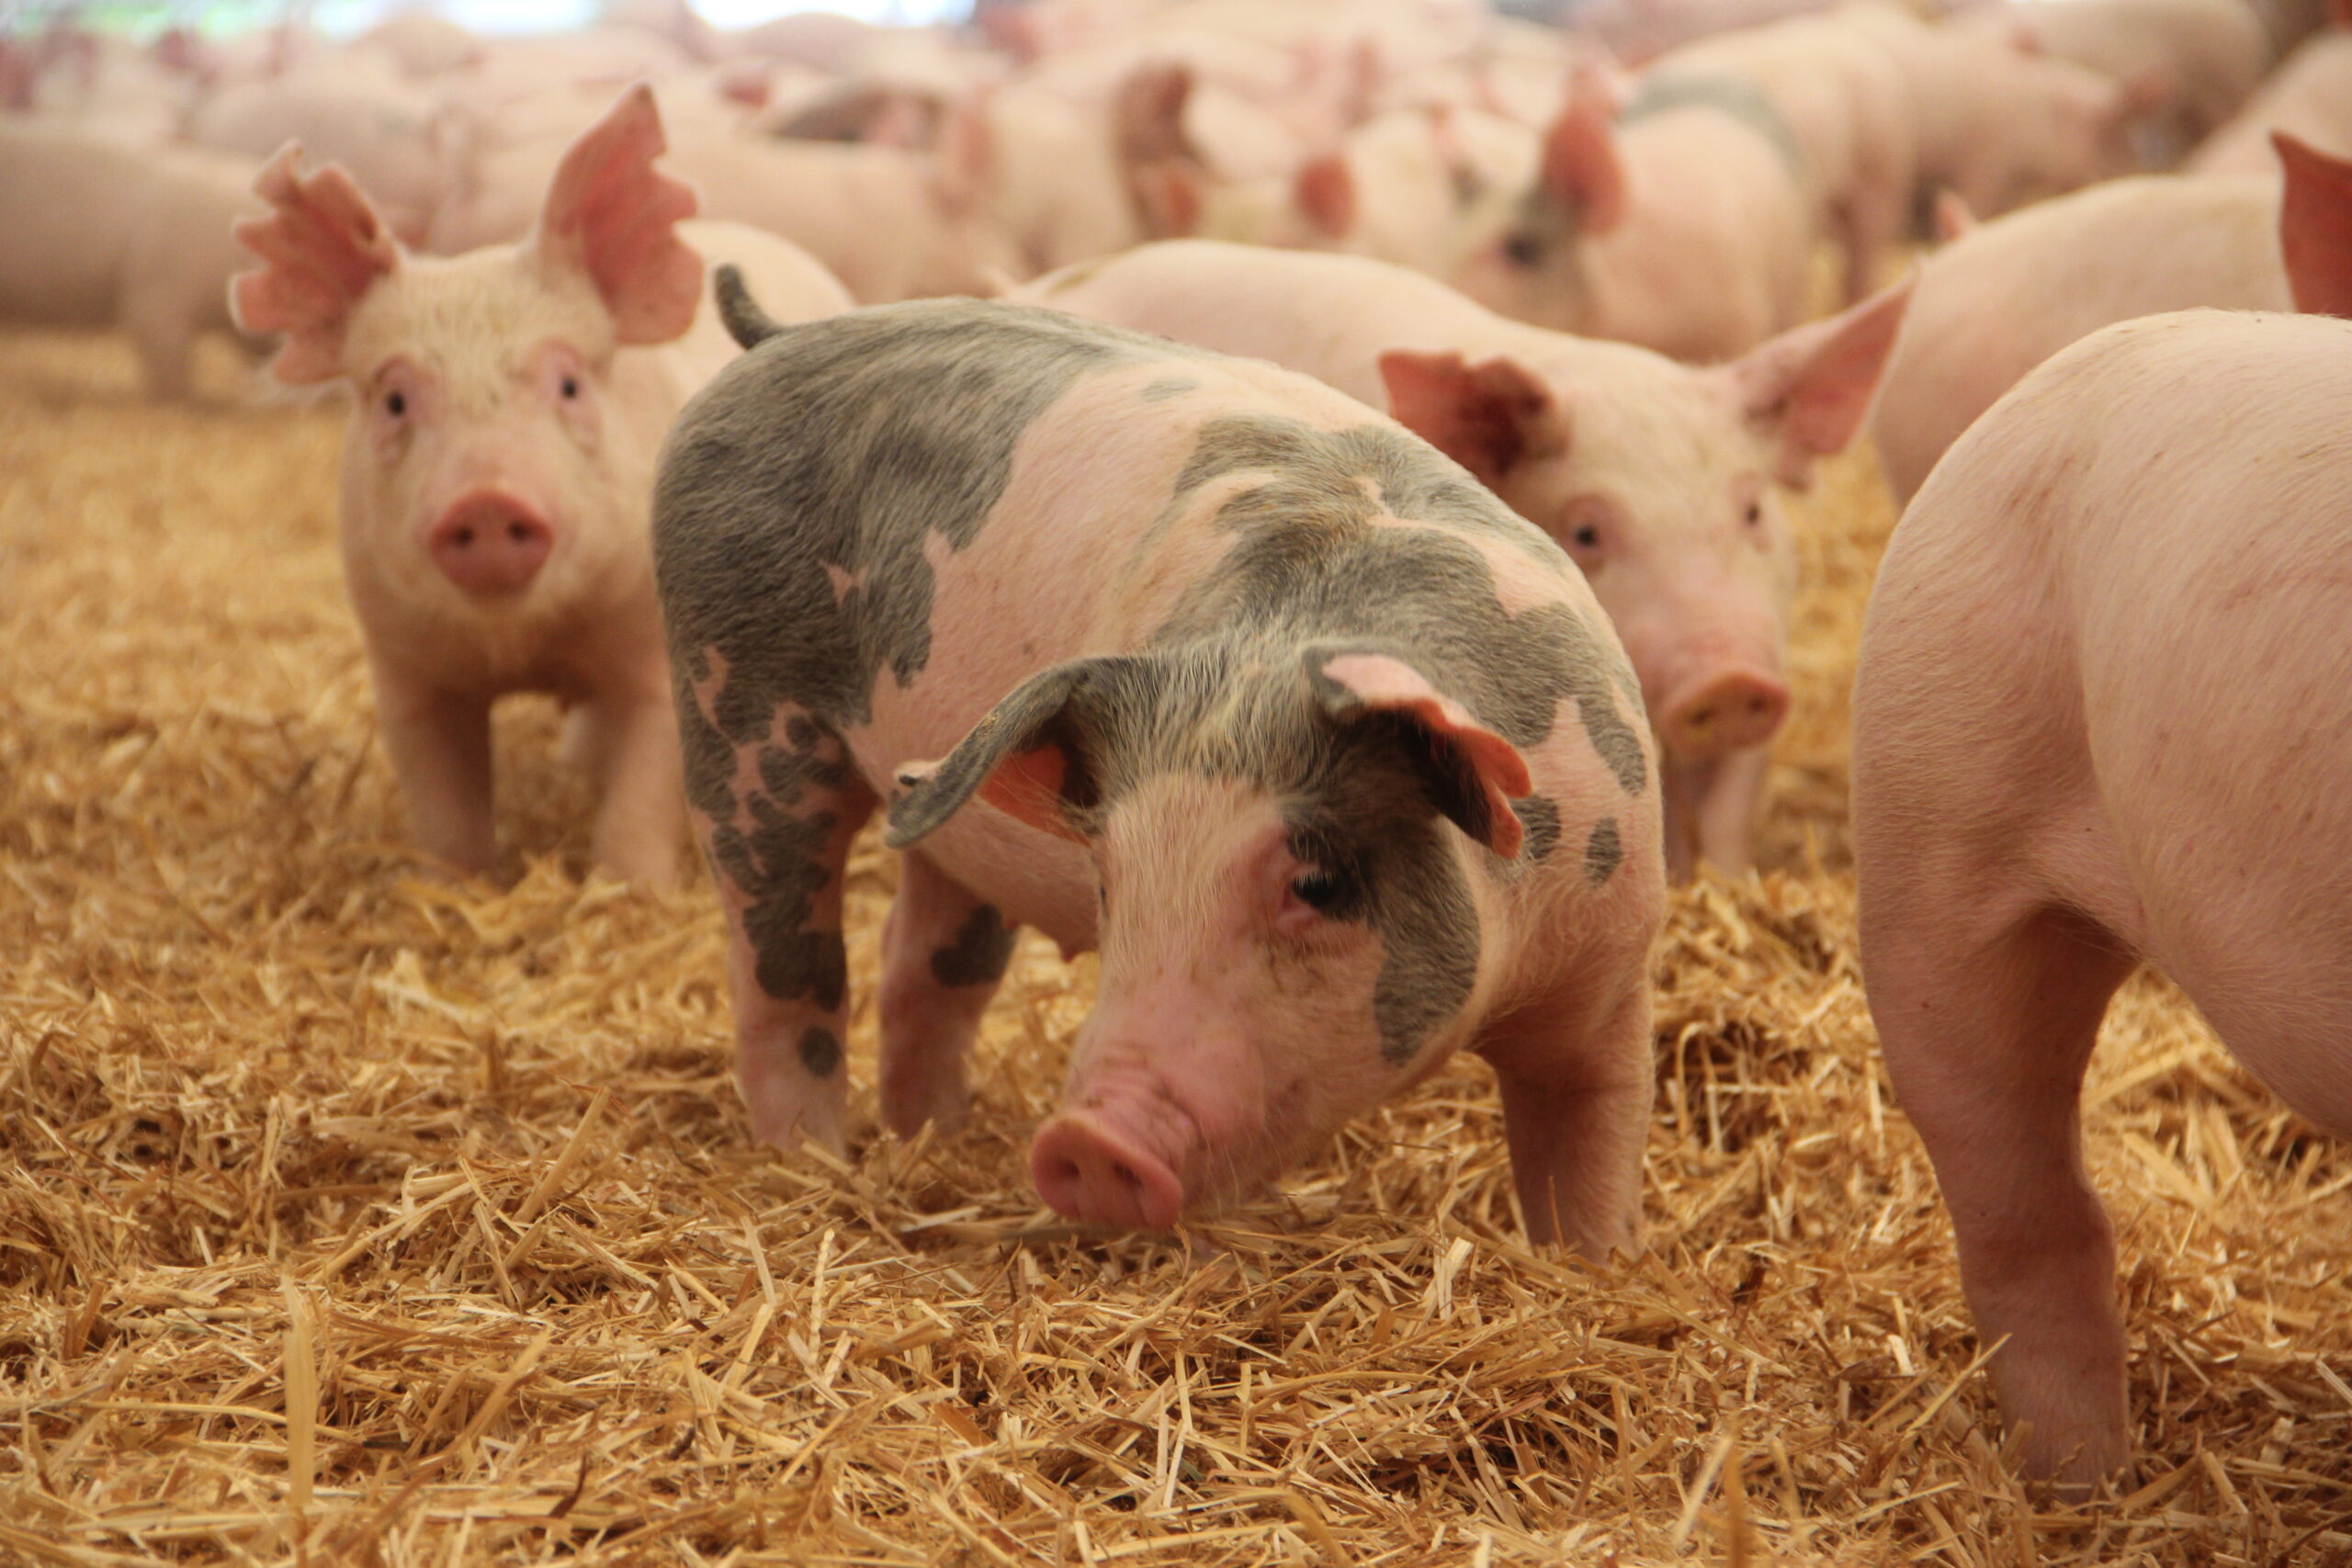 A California Proposition to Give Farm Animals More Rights Put on Hold ￼